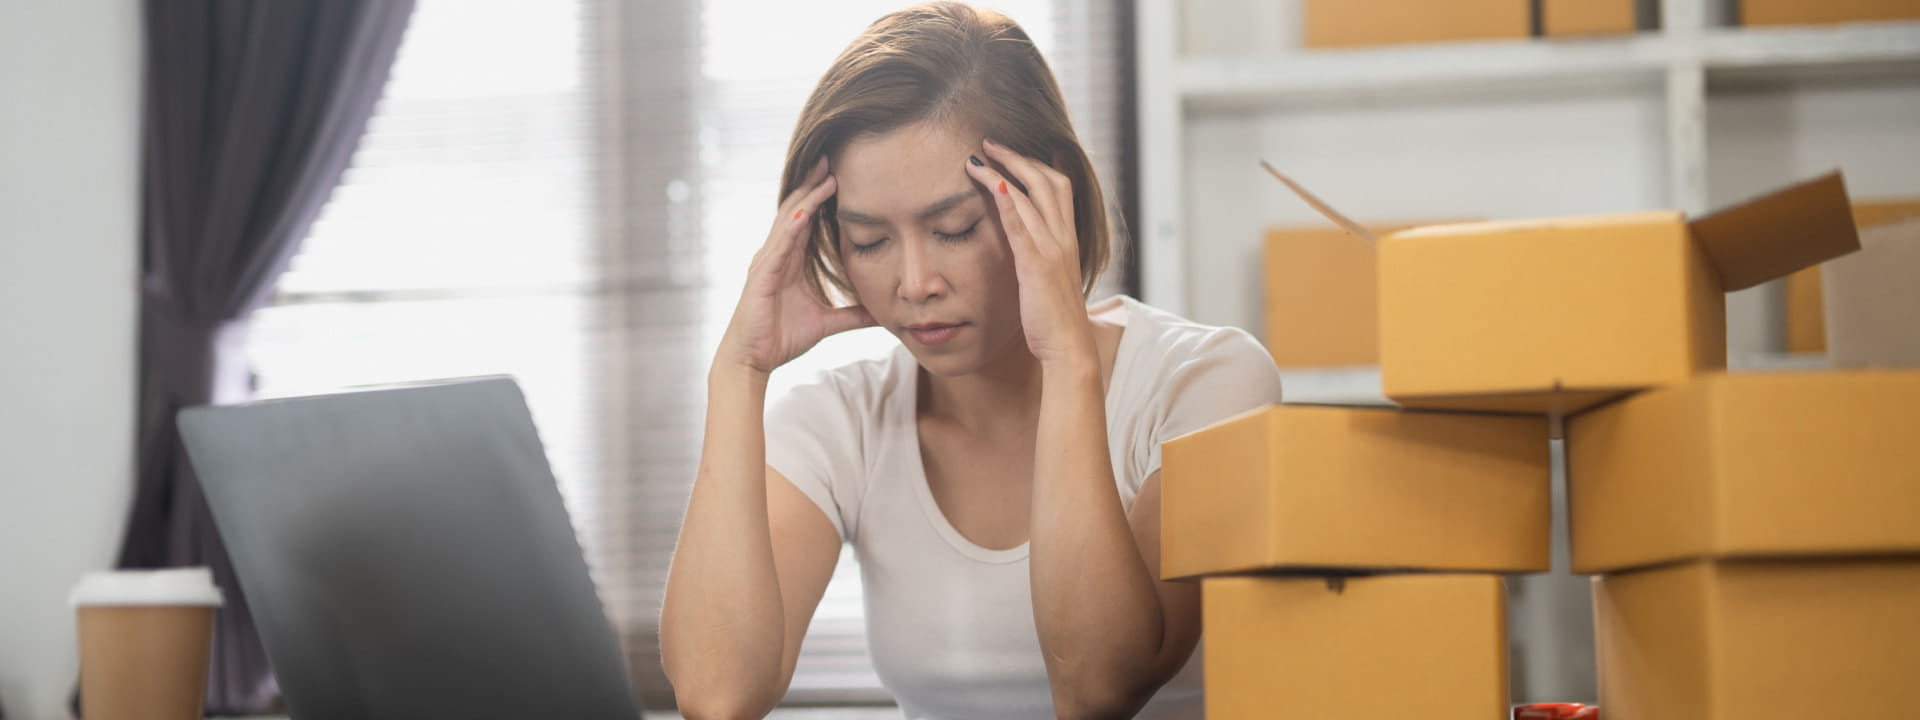 A lady ecommerce business owner visibly stressed with packages and a laptop on the desk